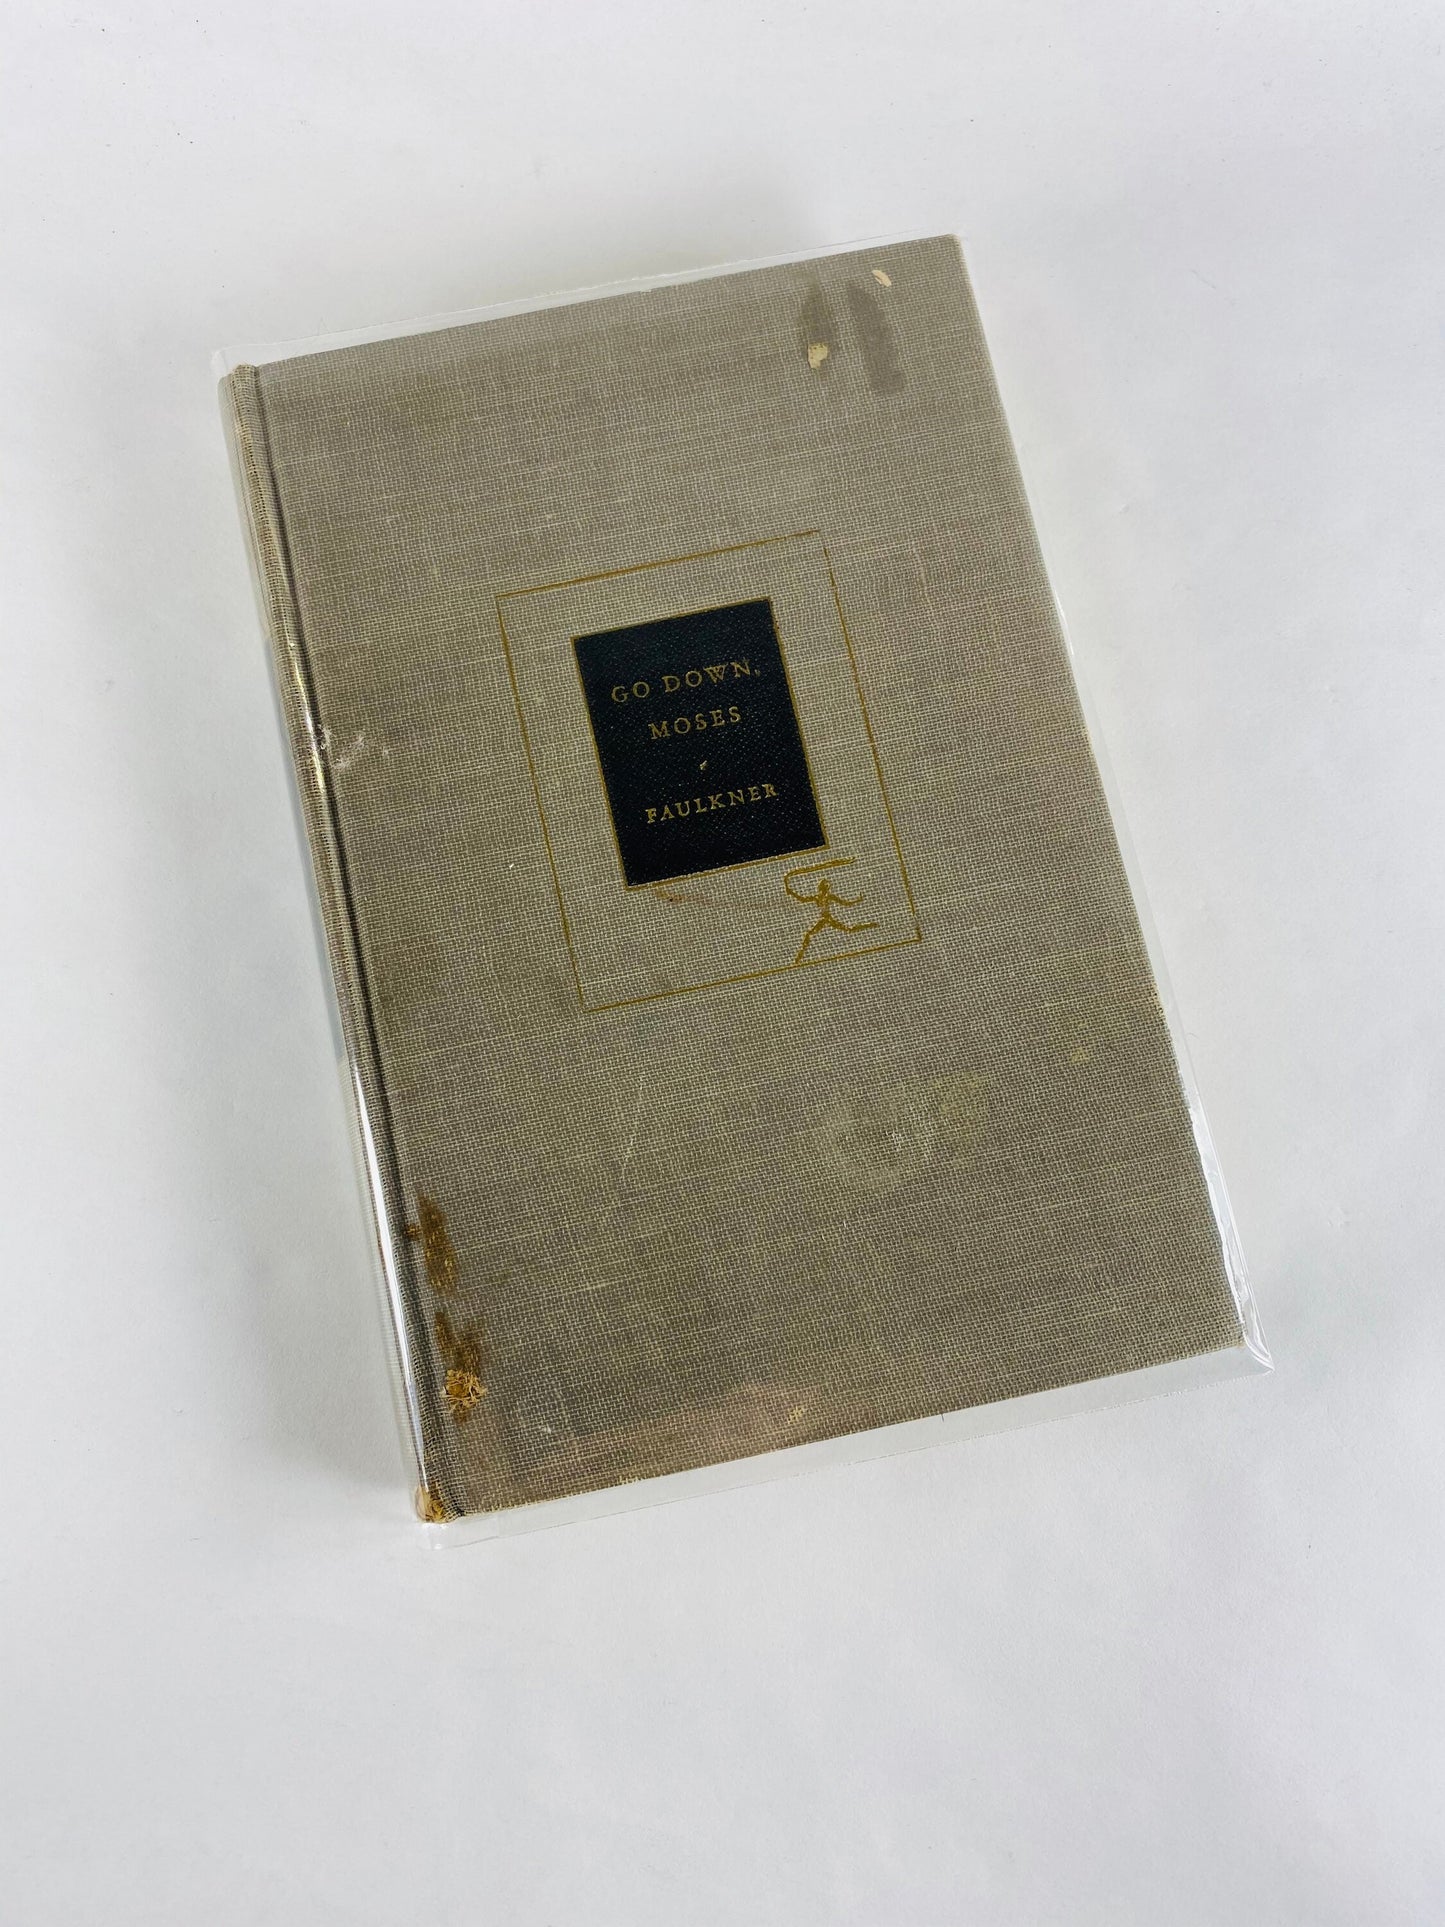 William Faulkner's Go Down, Moses. Gray cloth covered vintage Modern Library book circa 1946. 100 best novels